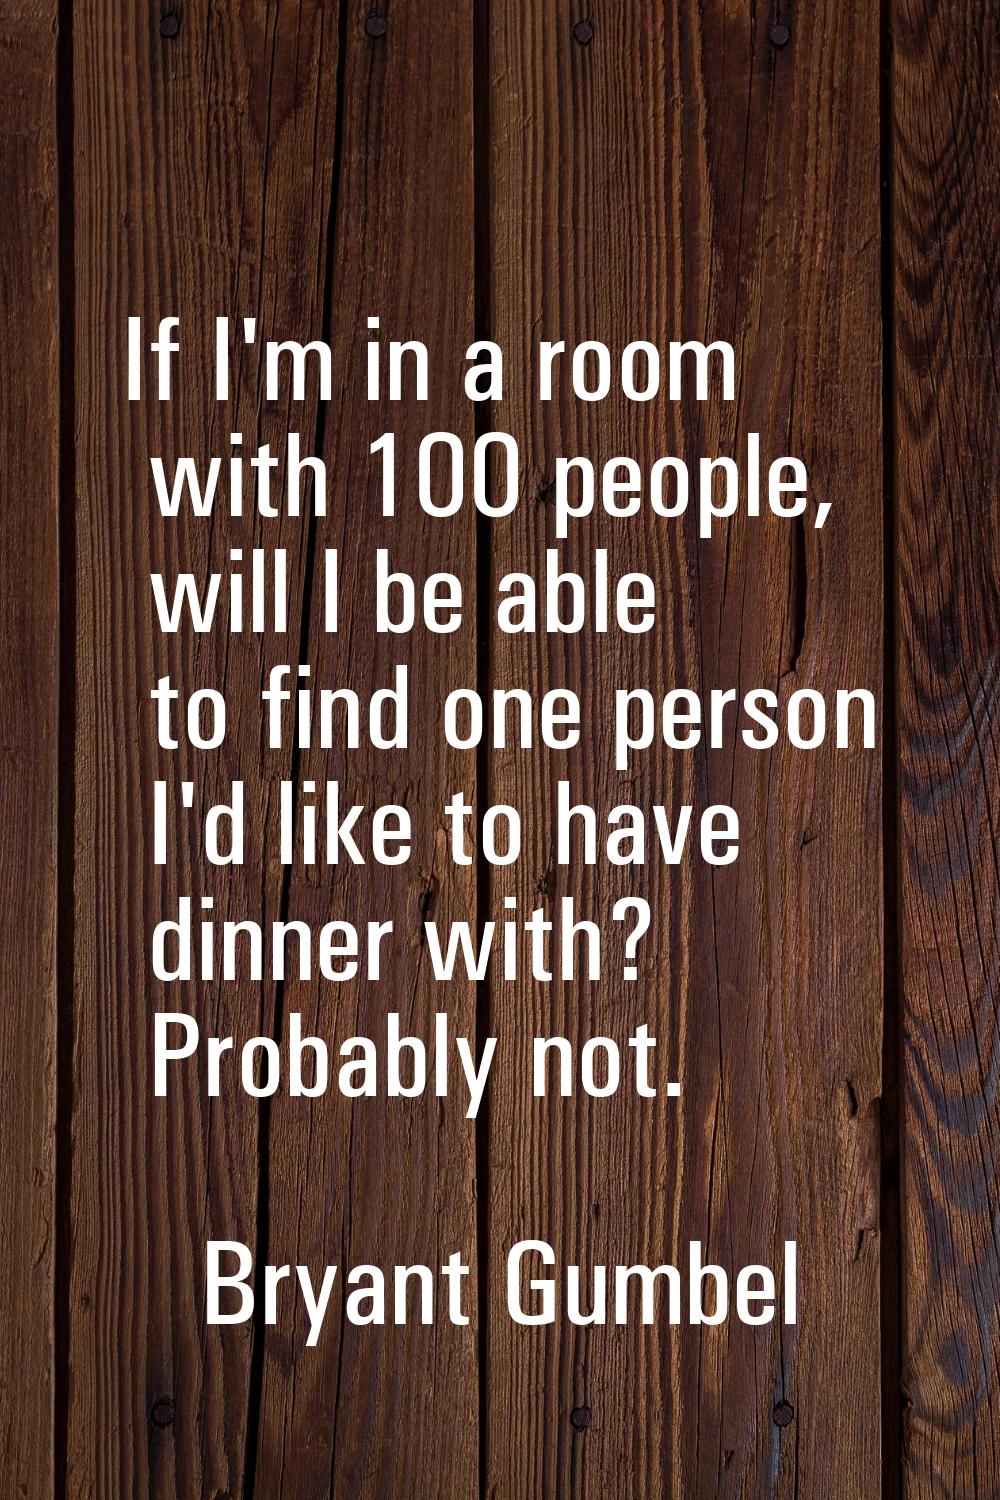 If I'm in a room with 100 people, will I be able to find one person I'd like to have dinner with? P